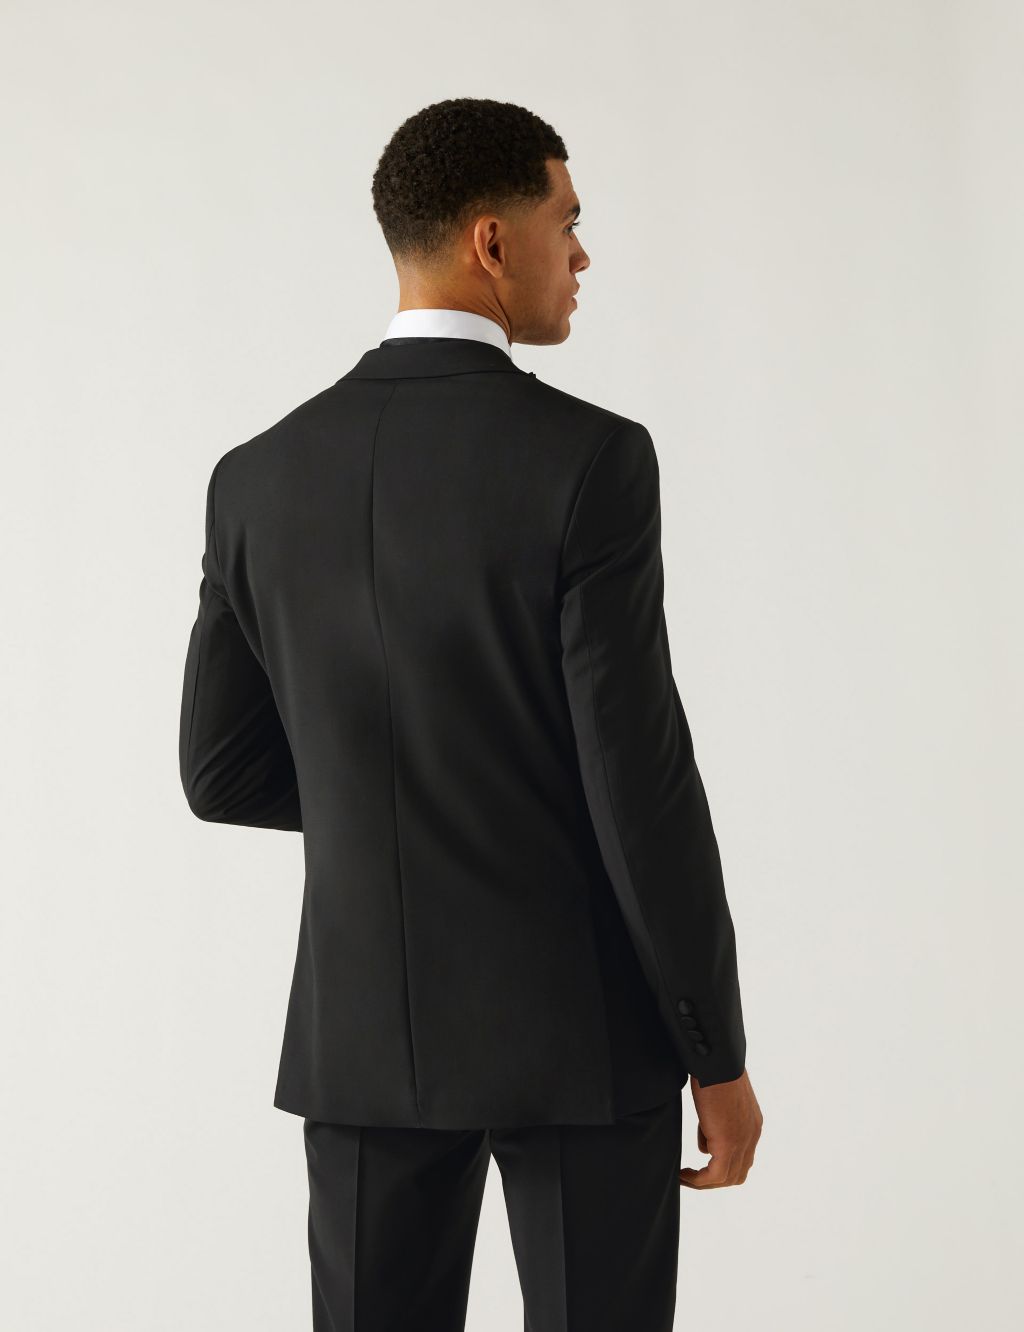 The Ultimate Tailored Fit Tuxedo image 3